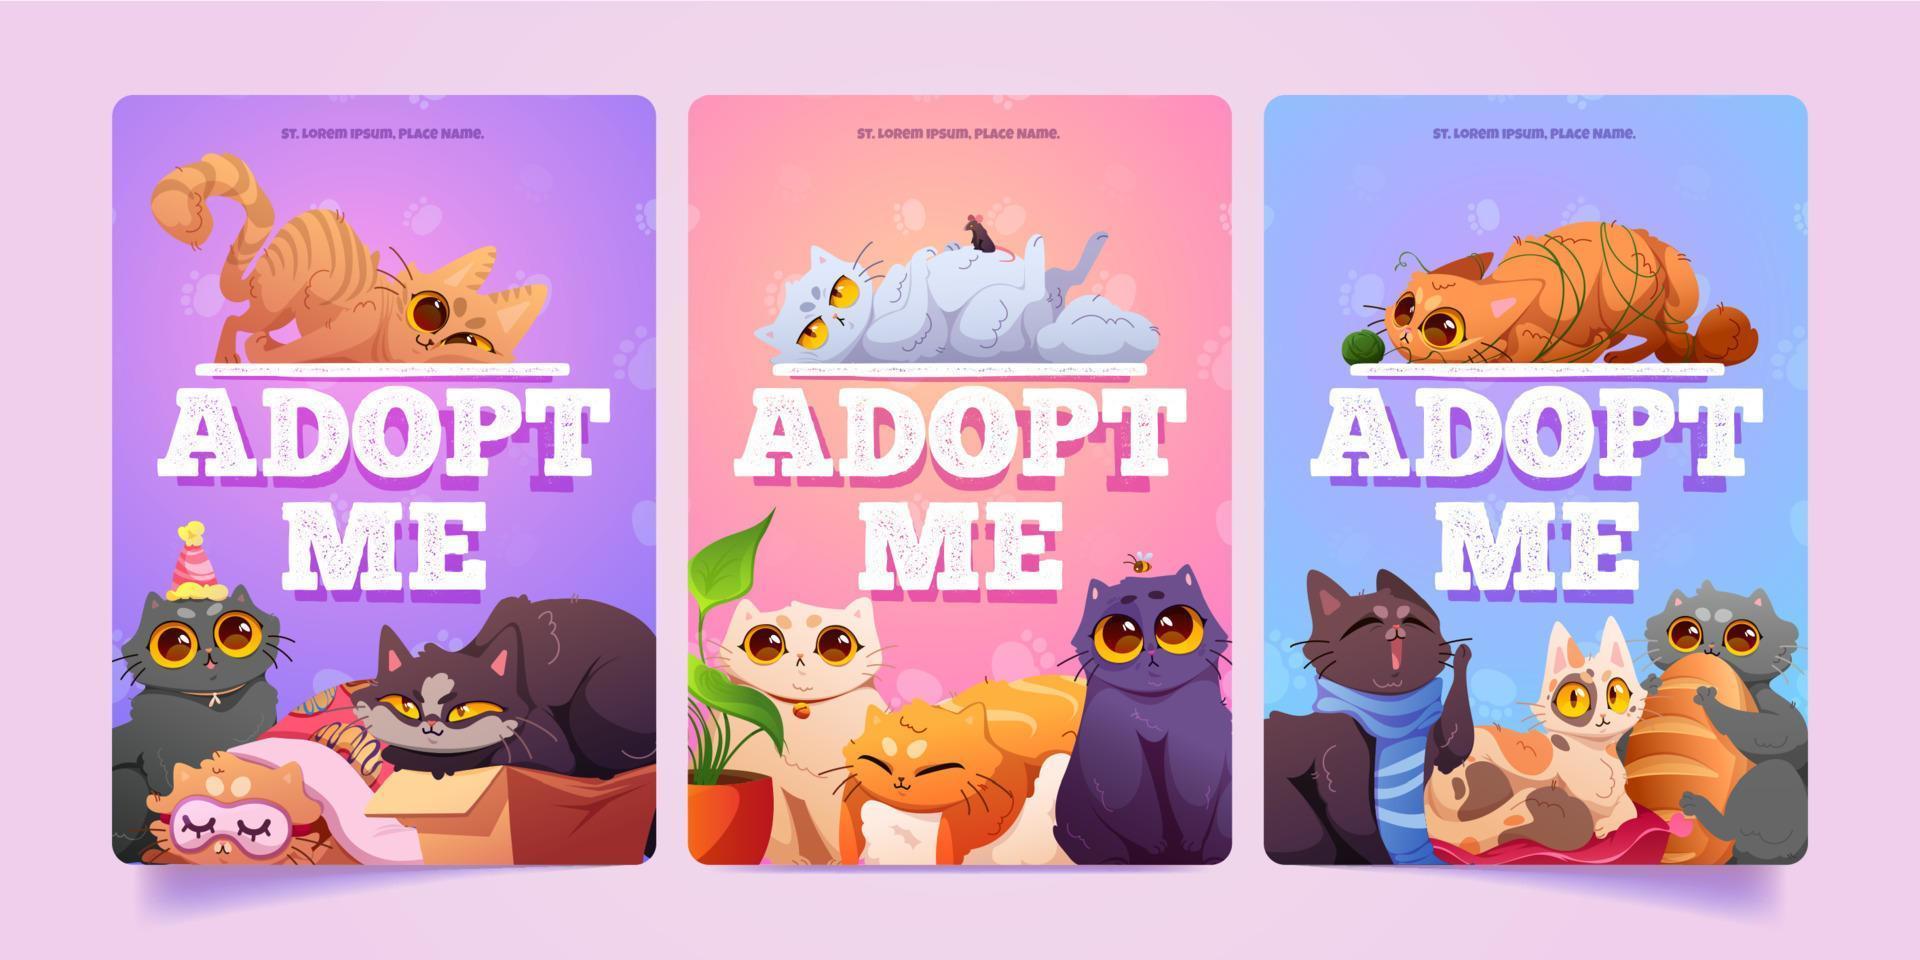 Adopt me posters with cute homeless cats vector